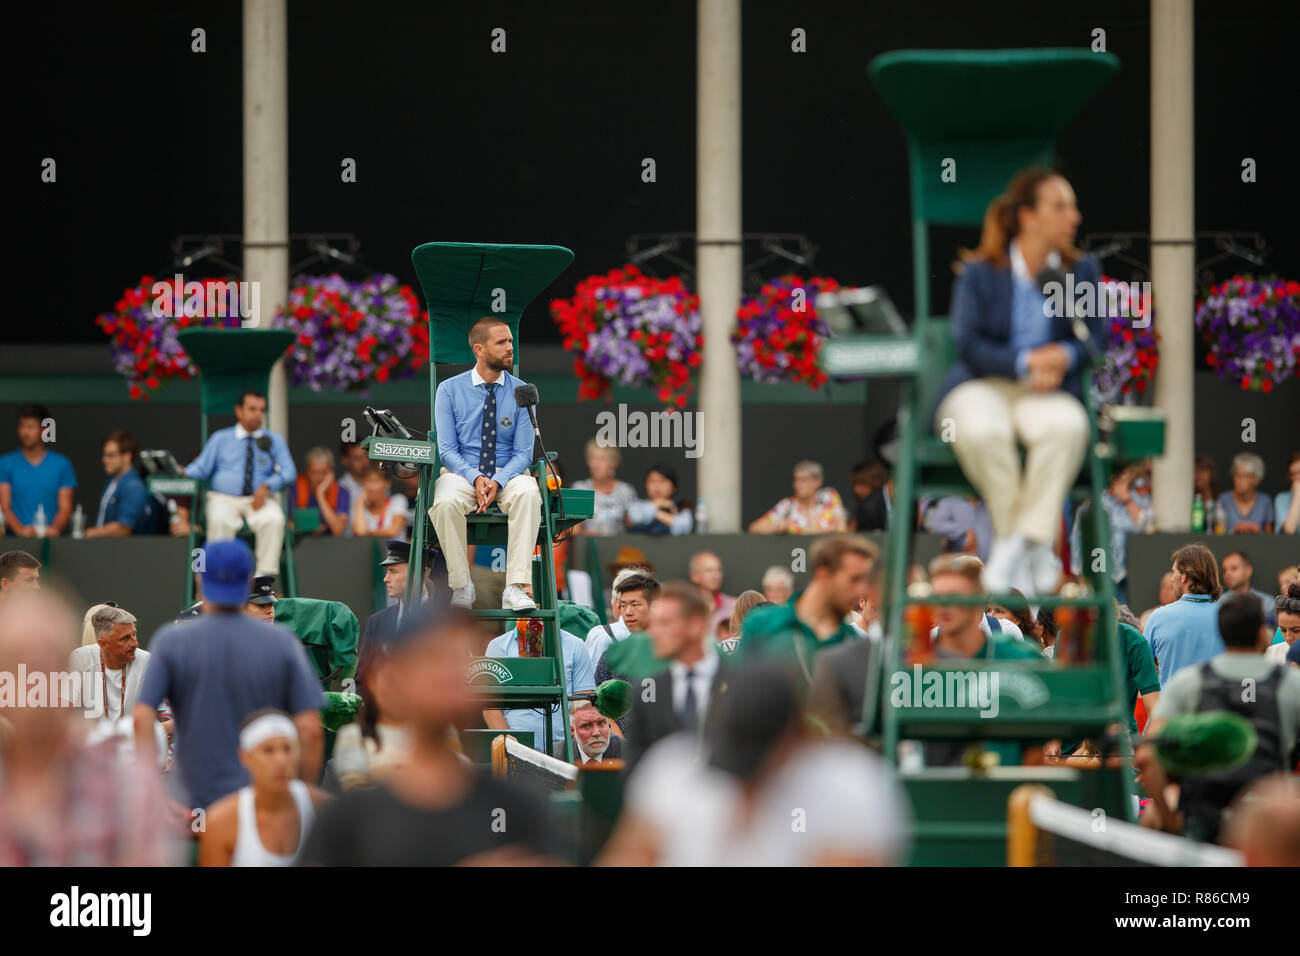 Color image of Umpires on court during the Wimbledon Championships 2018 Stock Photo